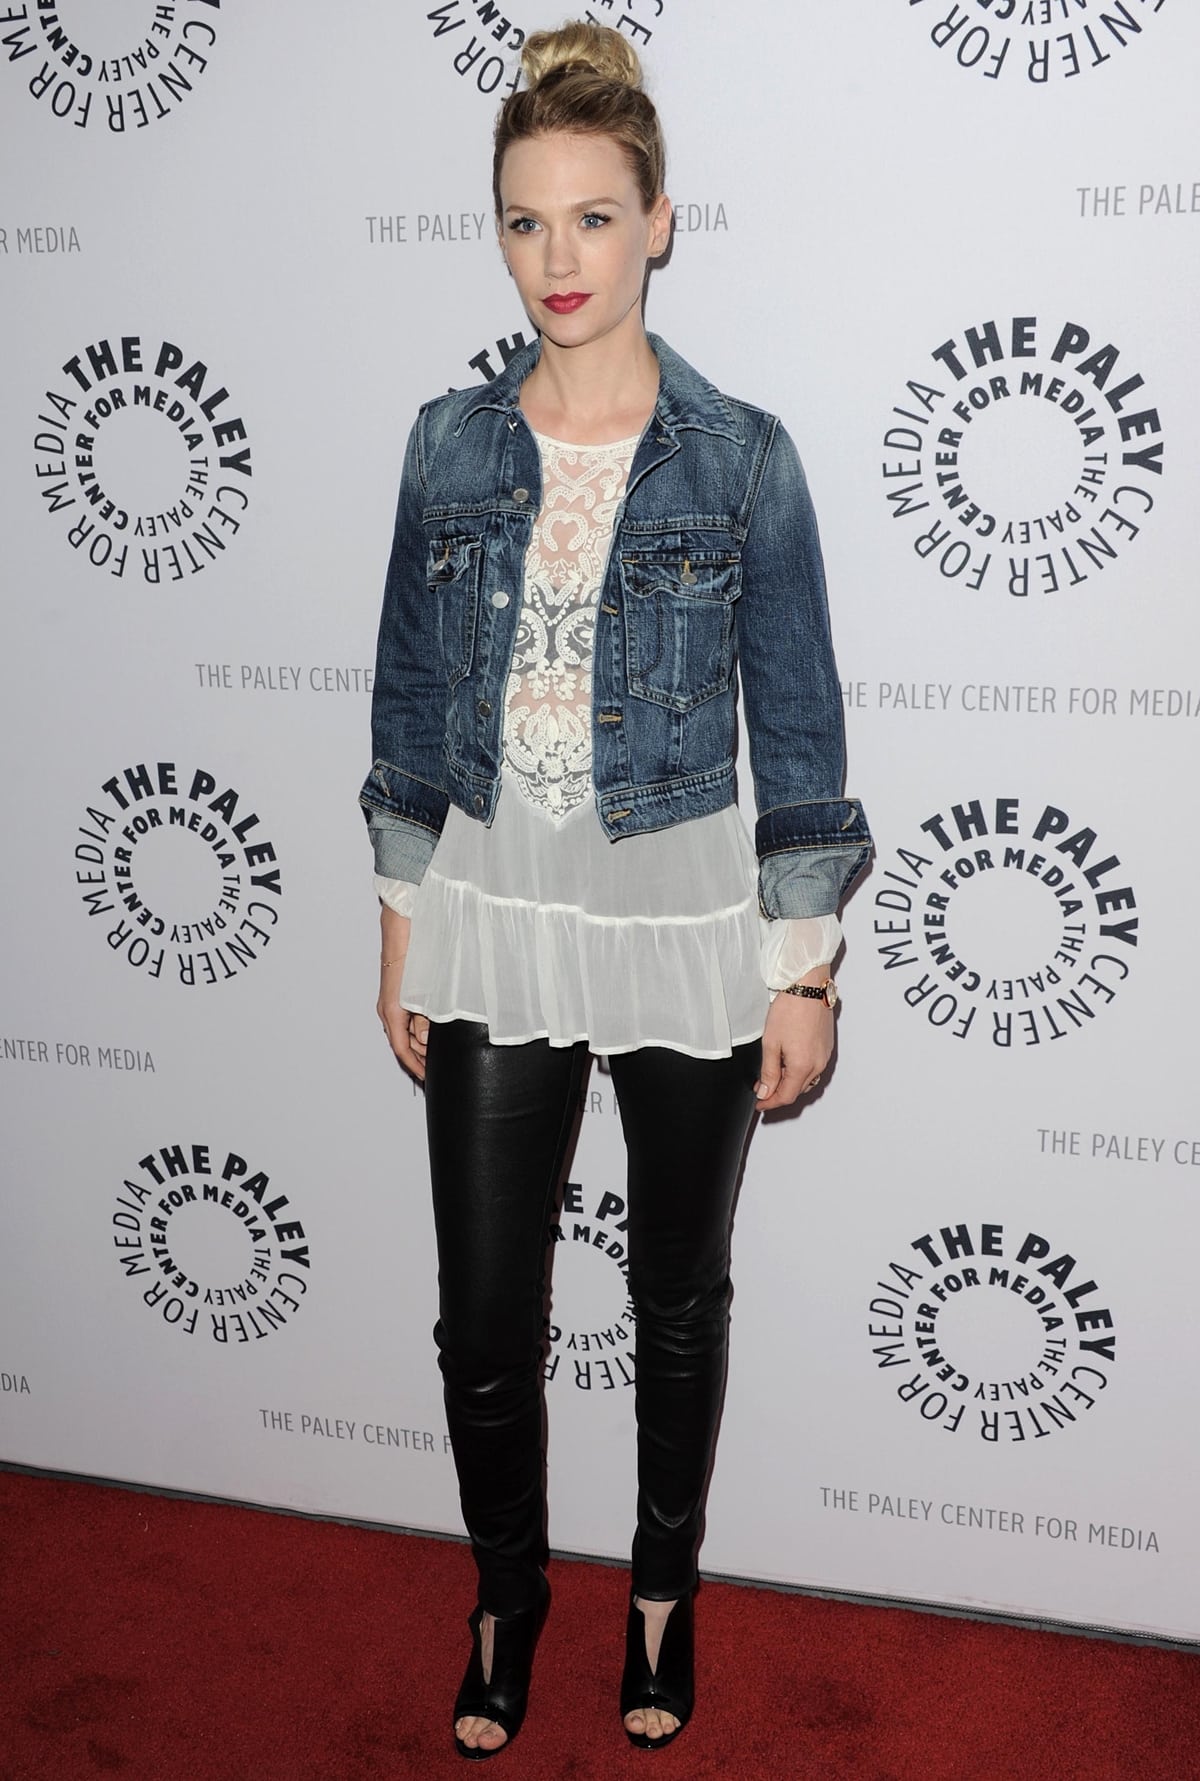 For her appearance at The Paley Center for Media, January Jones sported a Zara blouse, a denim Textile by Elizabeth and James jacket, Helmet Lang pants, Christian Louboutin shoes, Marni bag, and IDC earrings